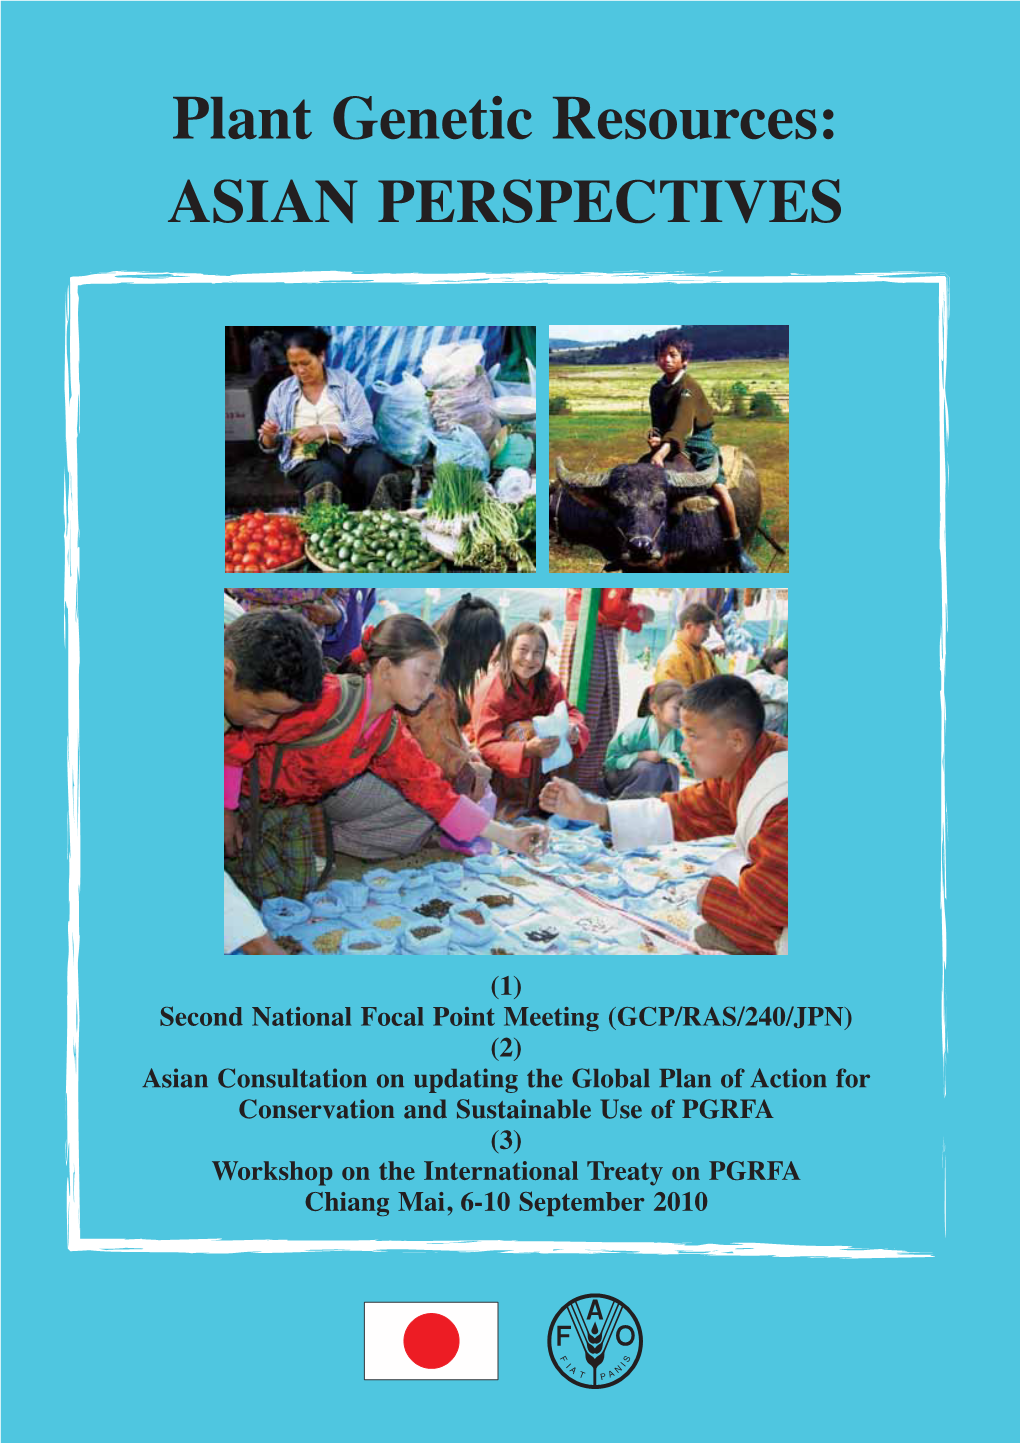 Plant Genetic Resources: ASIAN PERSPECTIVES